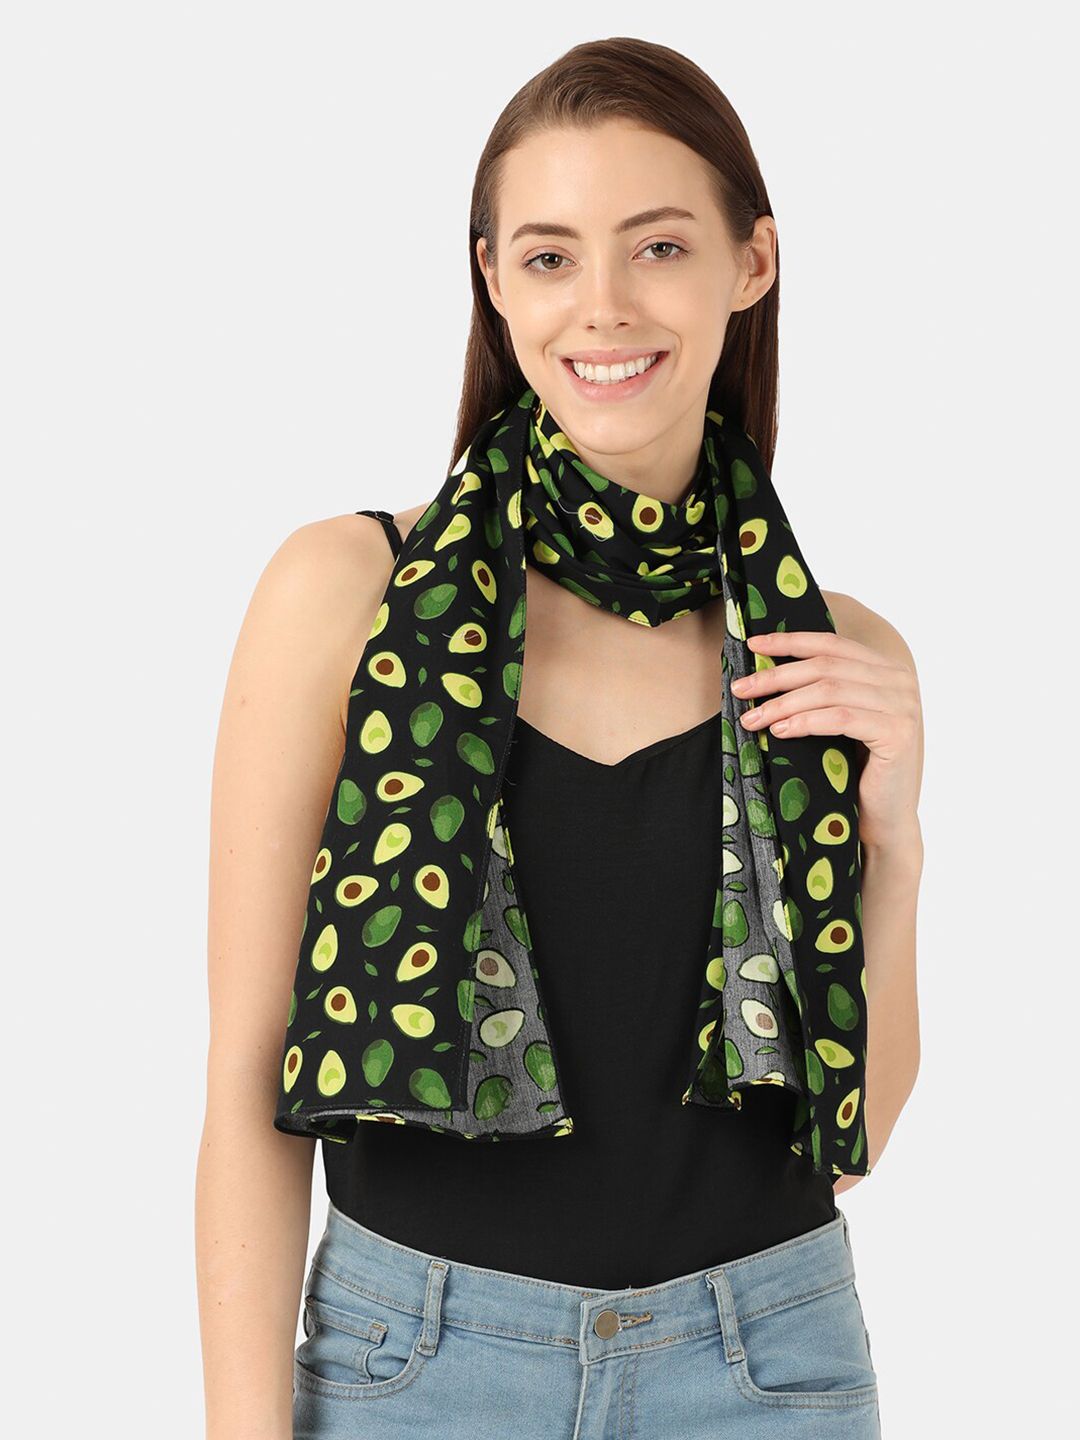 Llak Jeans Women Black & Yellow Printed Stole Price in India